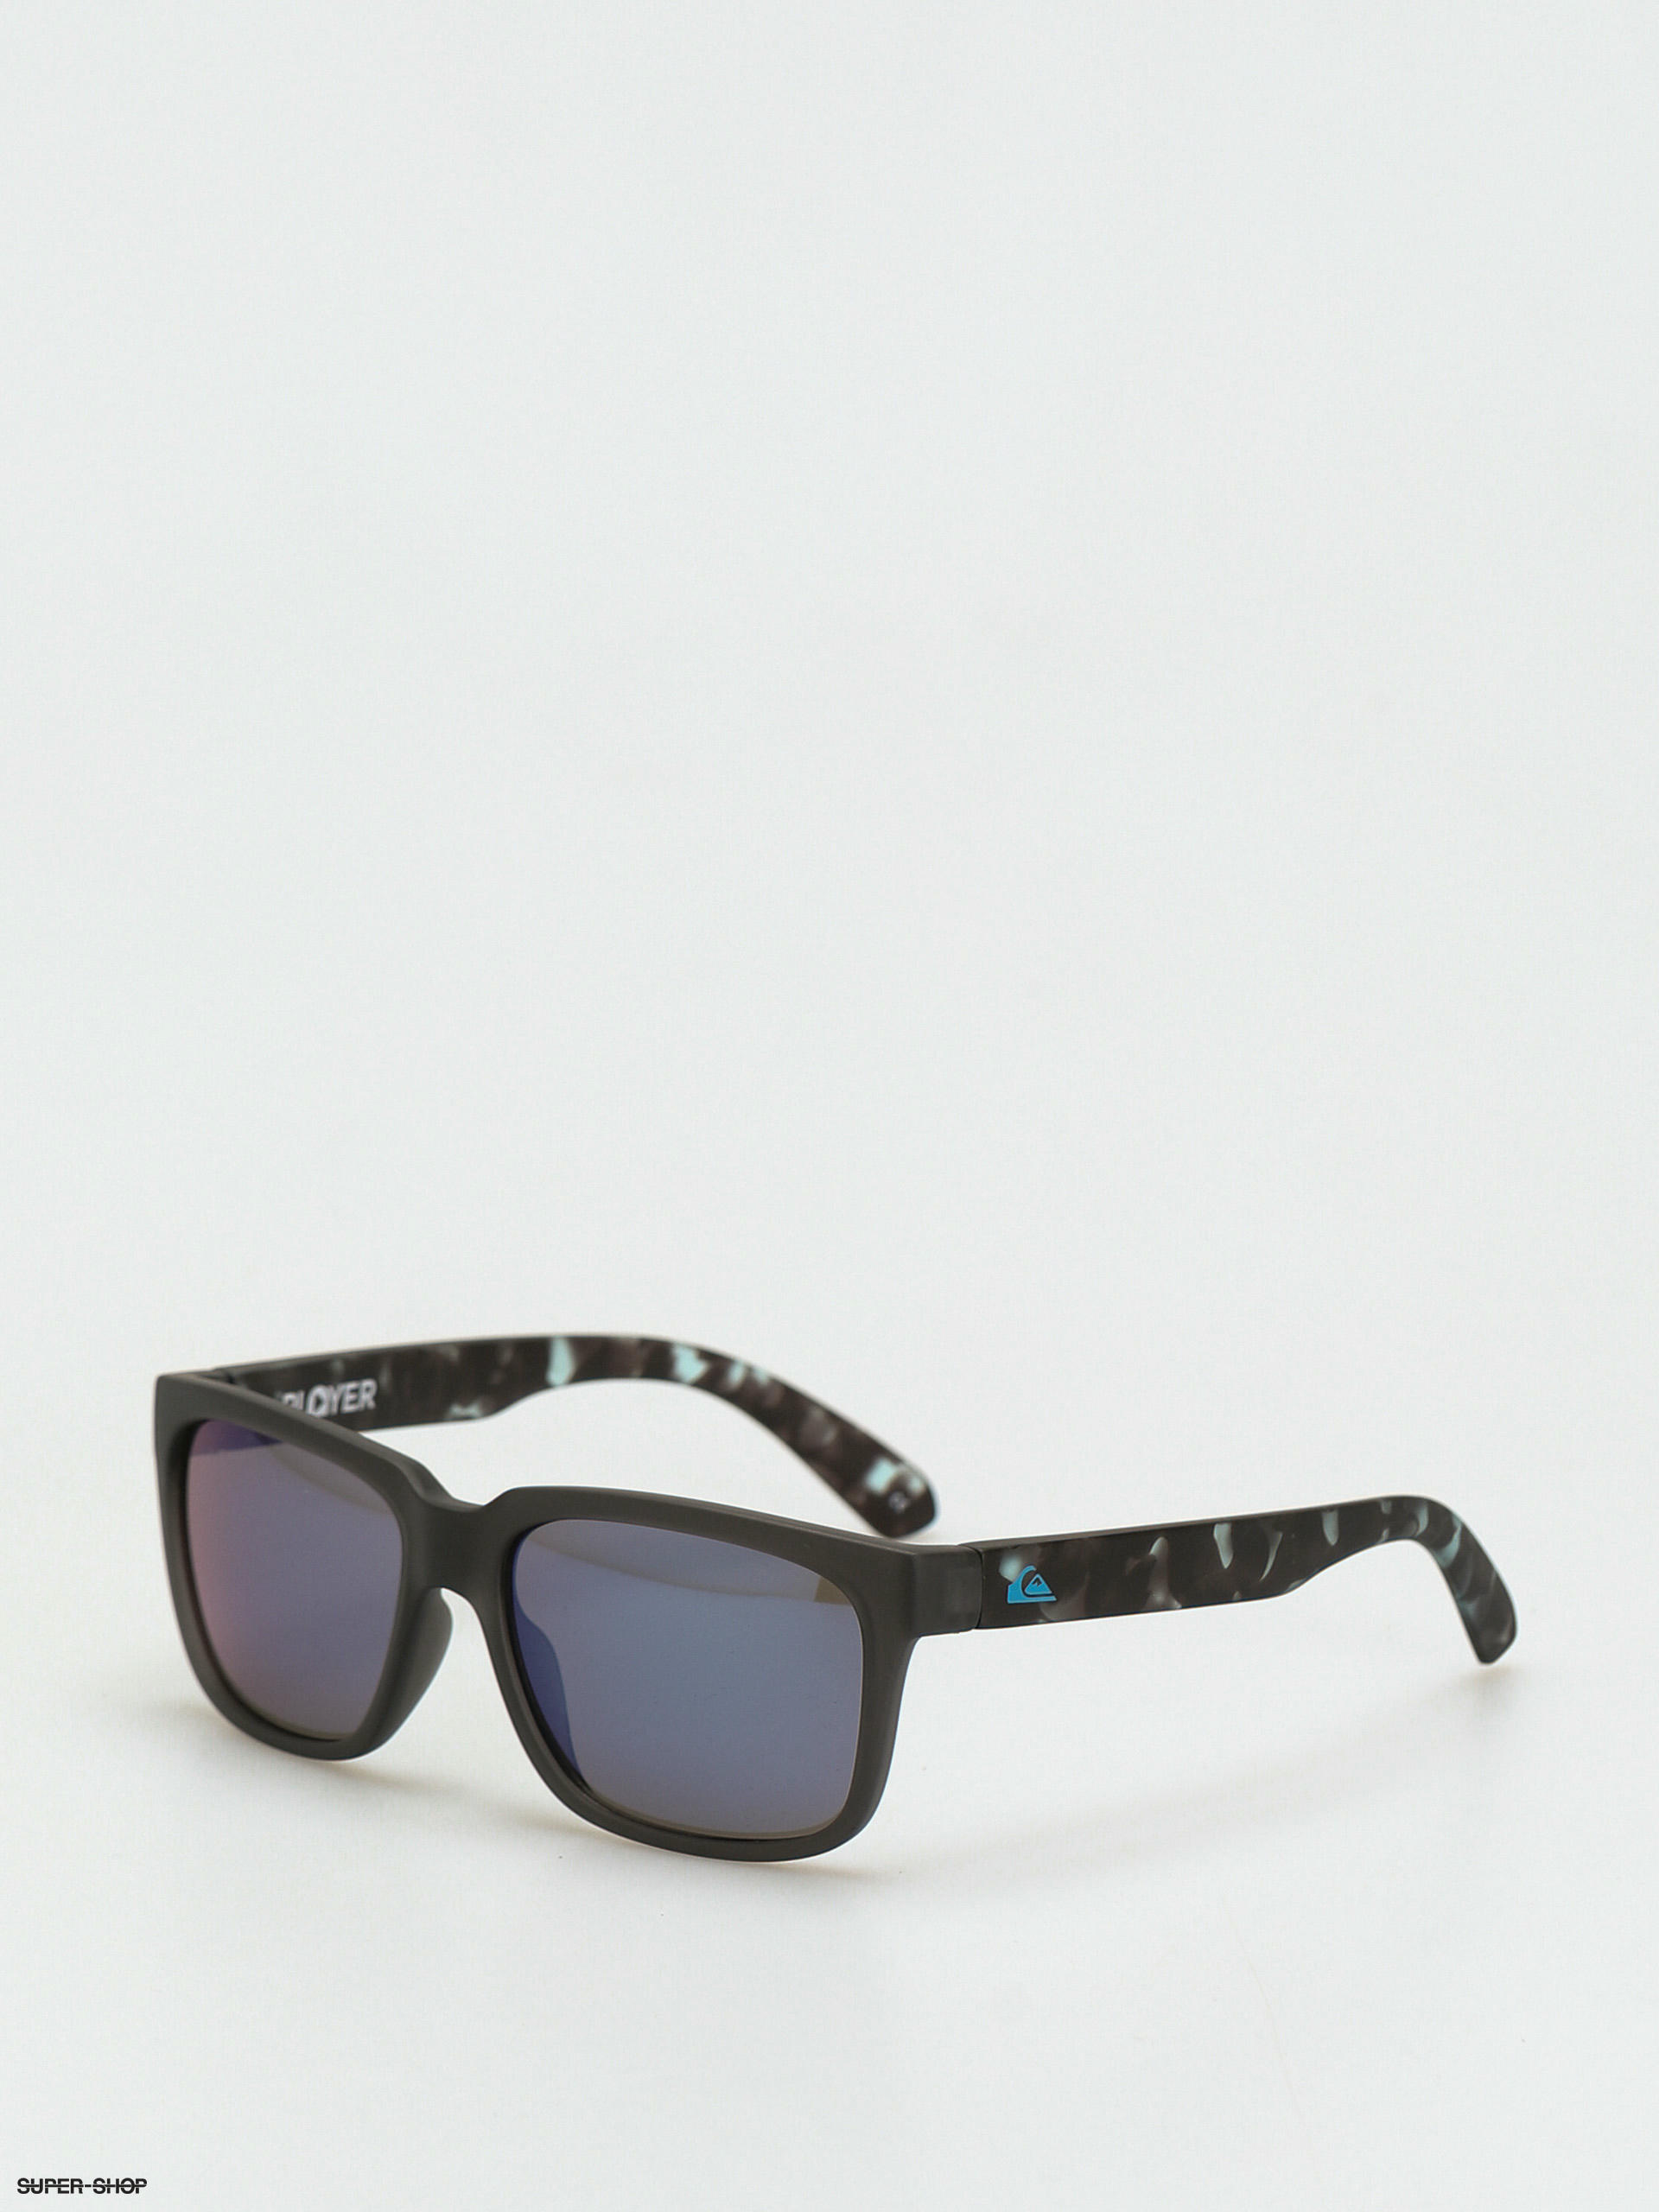 Buy Quiksilver Sunglasses | Accessories Online | THE ICONIC